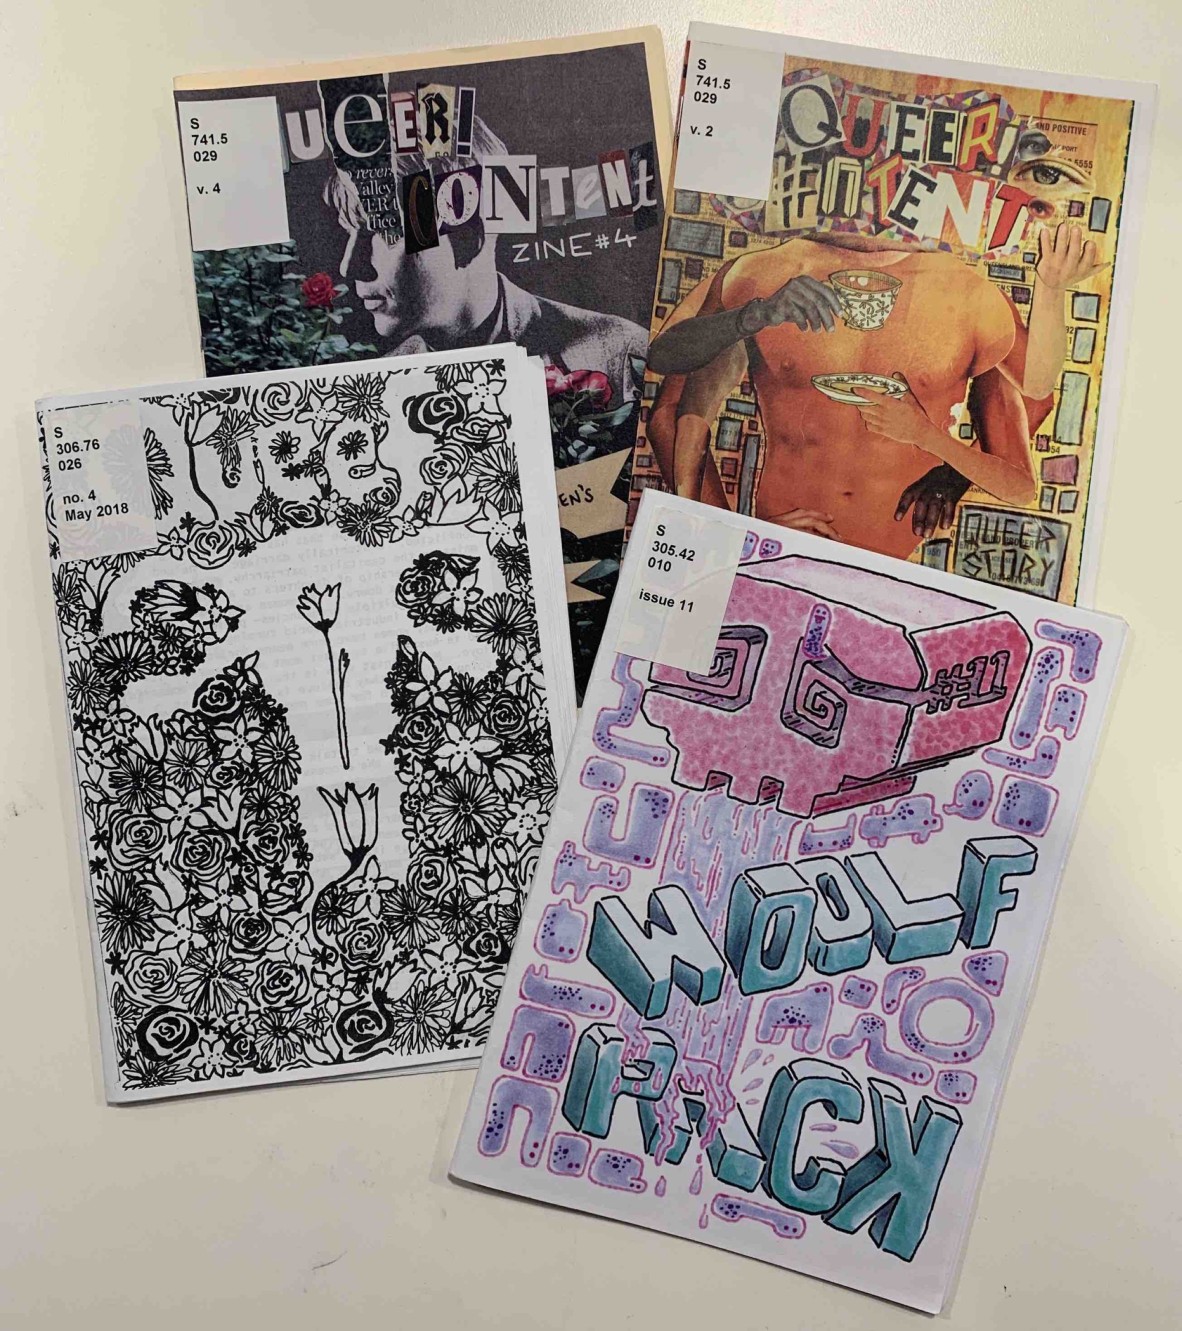 The covers of four LGBTQI+ zines from State Library of Queensland's collection